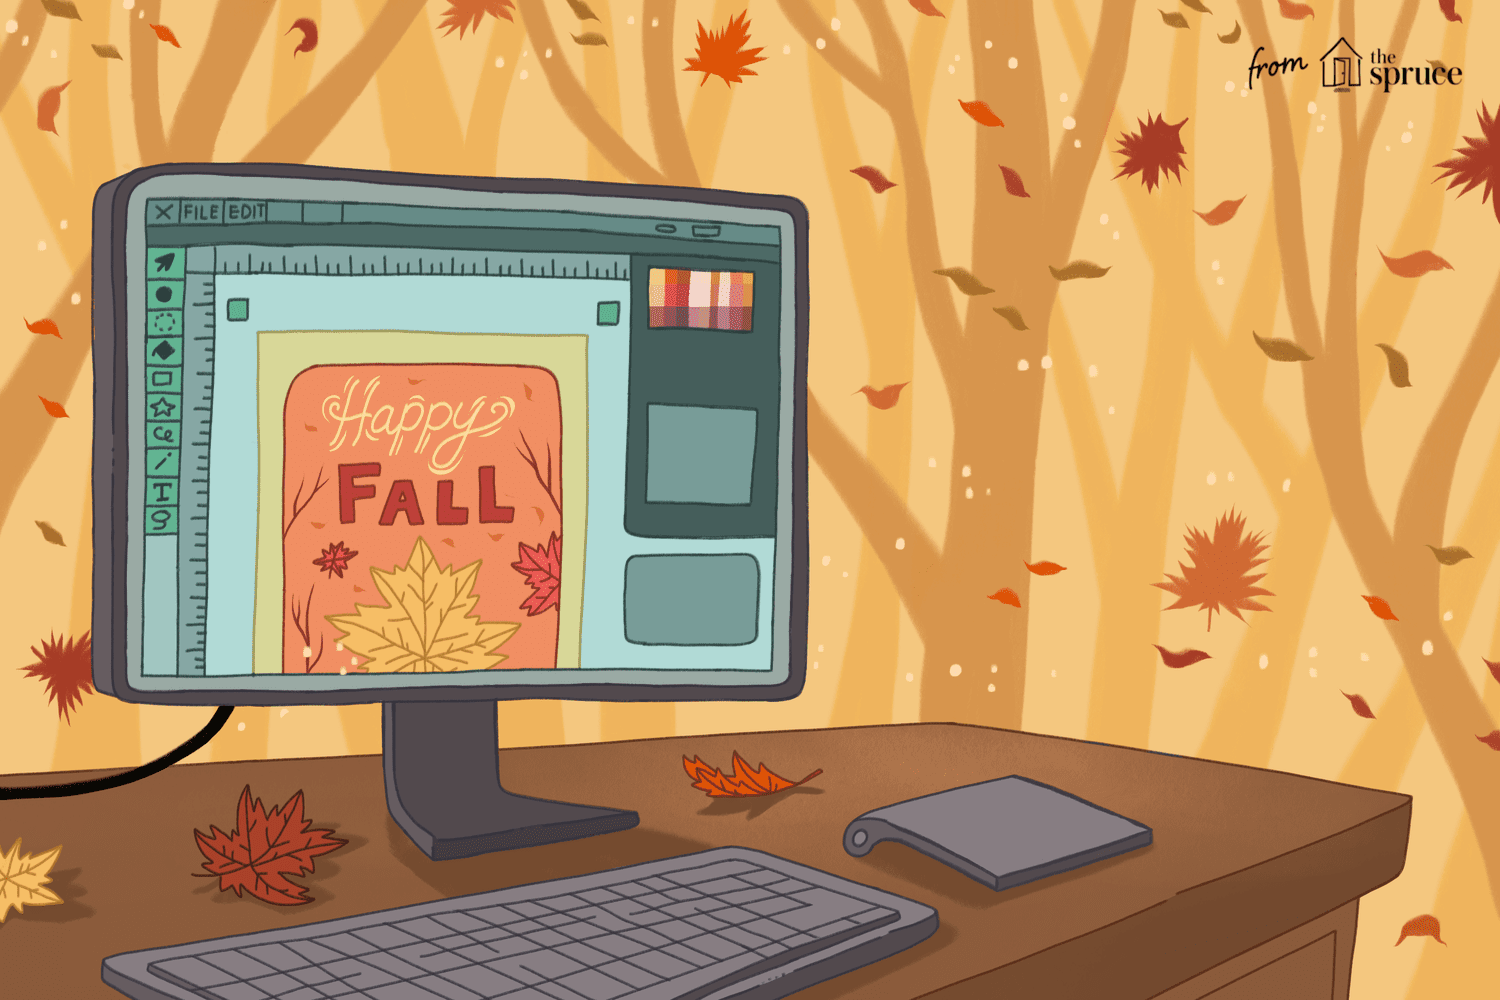 computer with fall clip art illustration